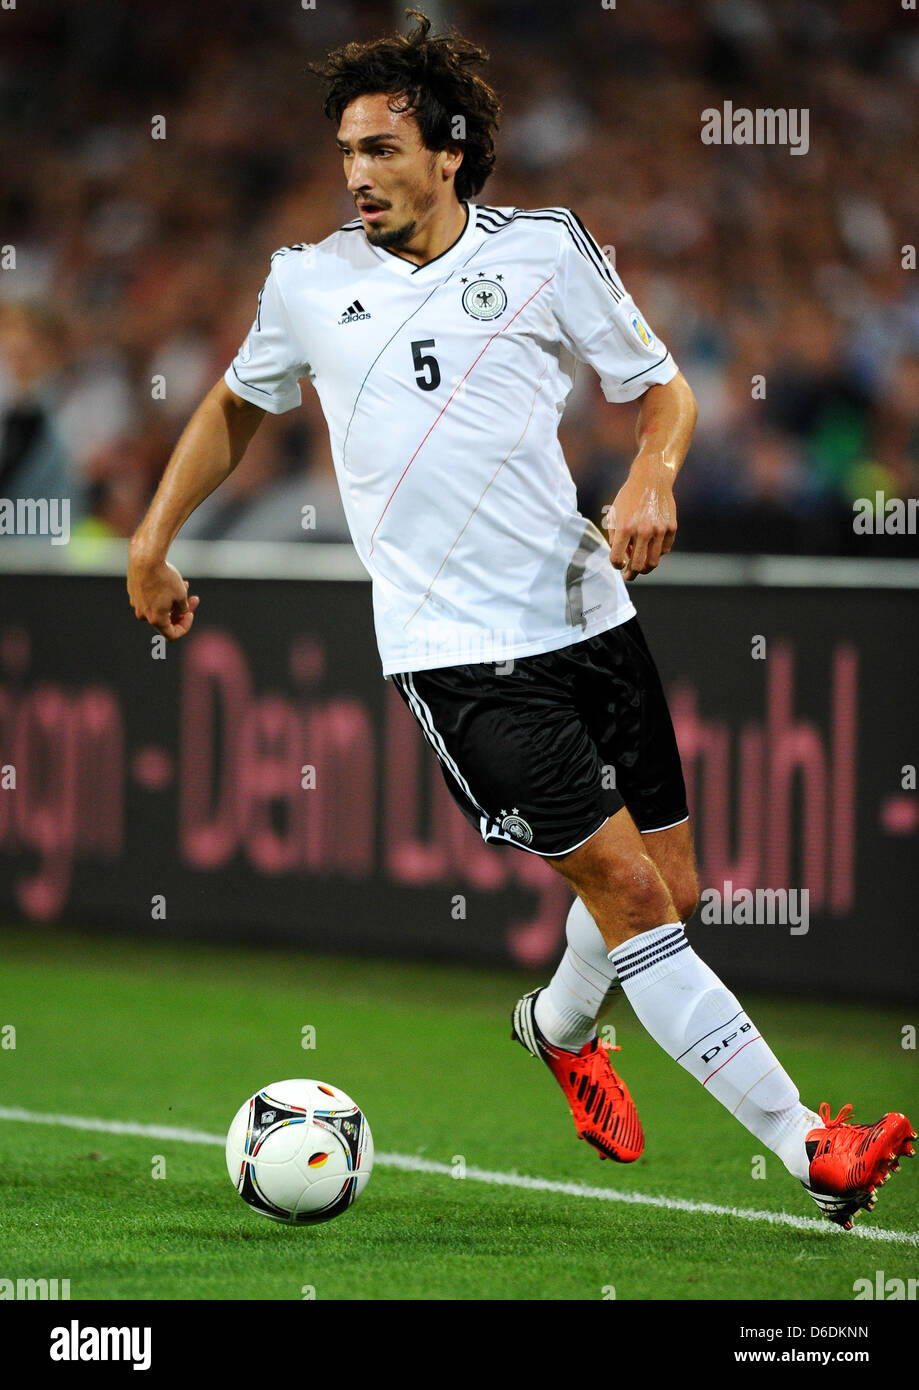 Germany's Mats Hummels dribbles the ball during the Group C FIFA World Cup 2014 qualifying match Germany vs Faroe Islands at AWD Arena in Hanover, Germany, 07 September 2012. Germany won 3:0. Photo: Thomas Eisenhuth Stock Photo